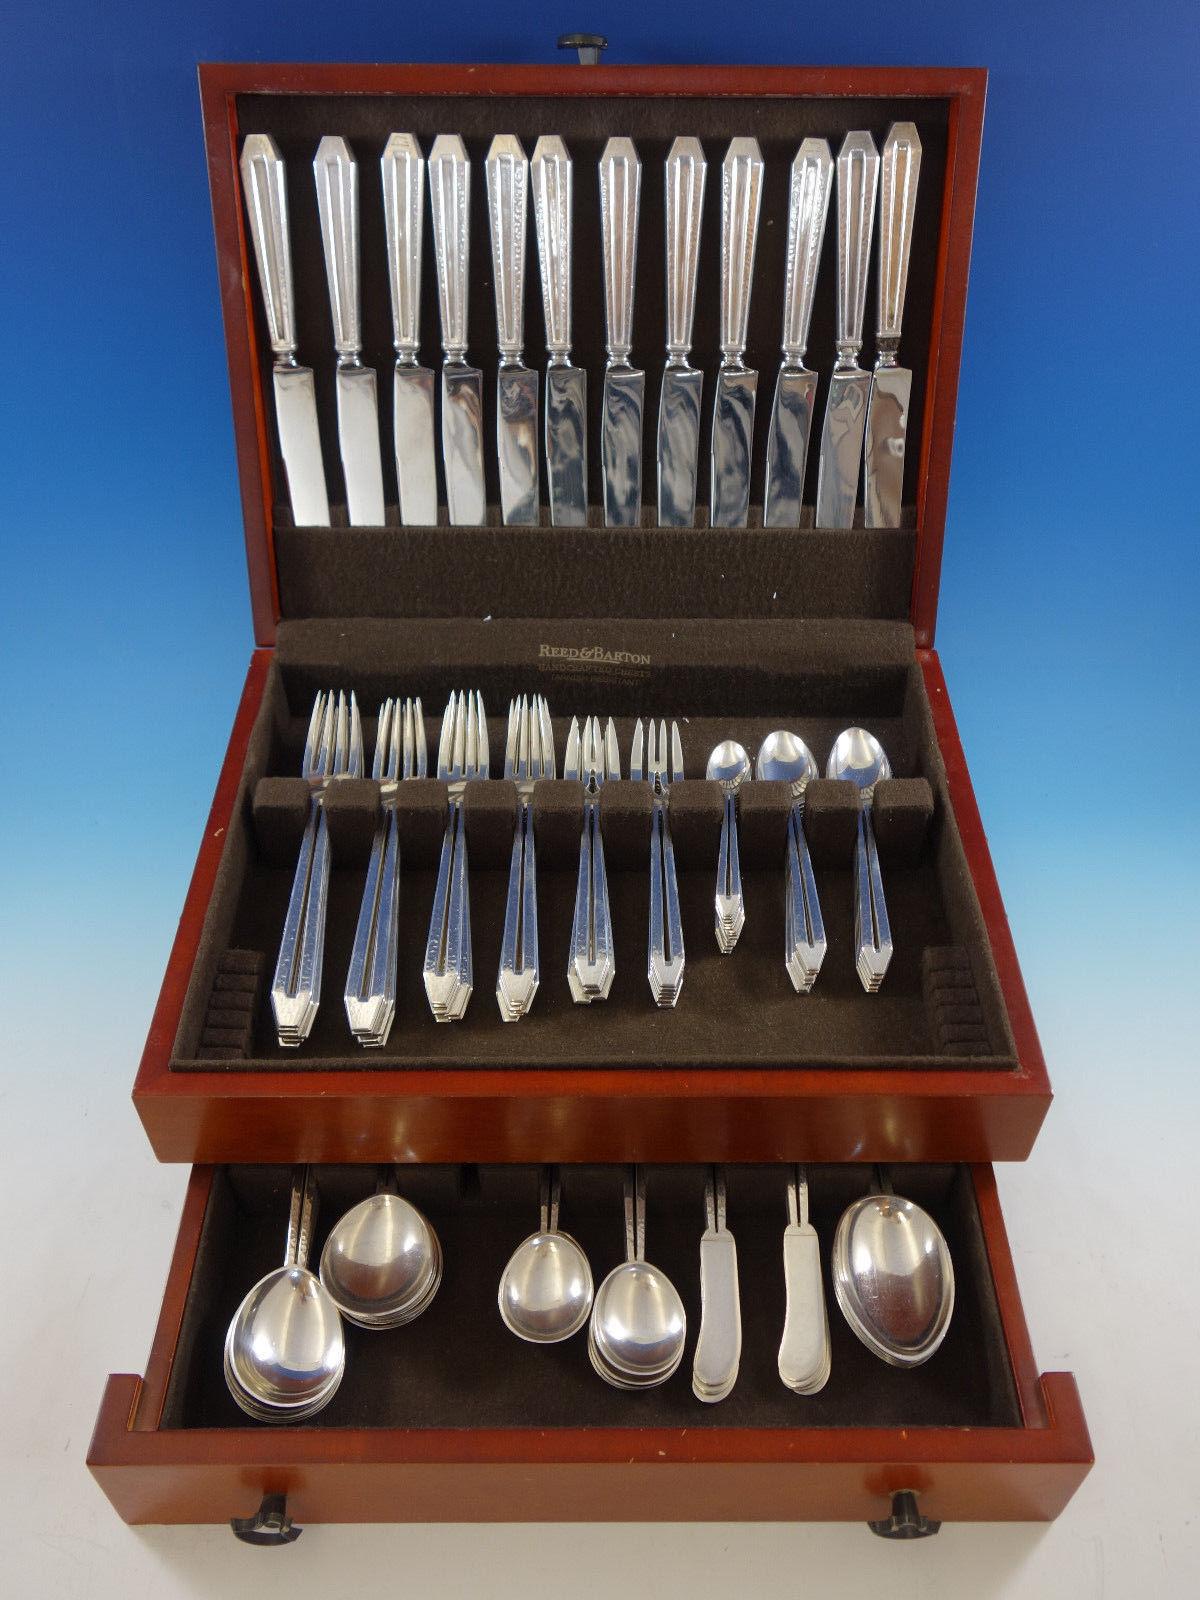 Rare dinner size Randahl sterling silver flatware set of 113 pieces. Handle with unique open design and gorgeous hand-hammered finish. This set includes: 12 dinner size knives, solid handles, 10